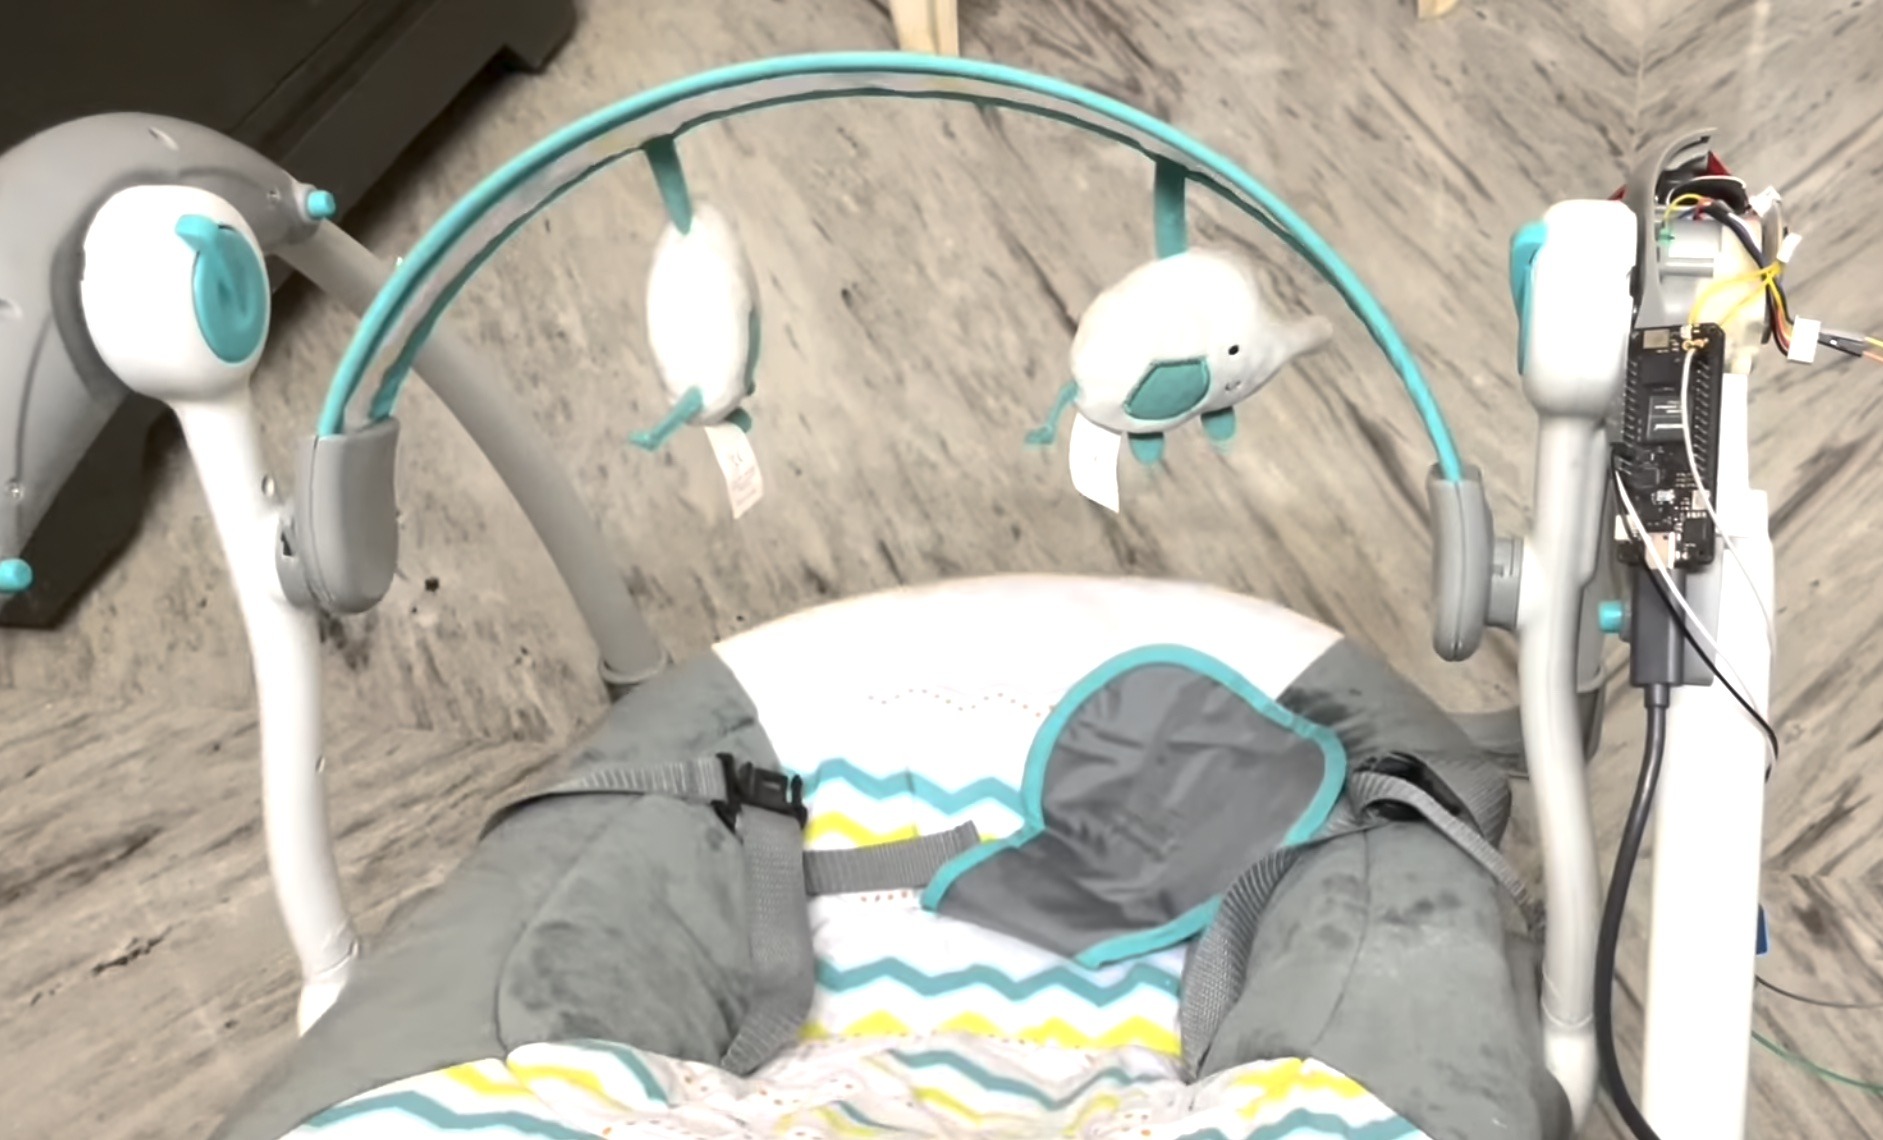 This TinyML powered baby swing starts automatically when crying is detected